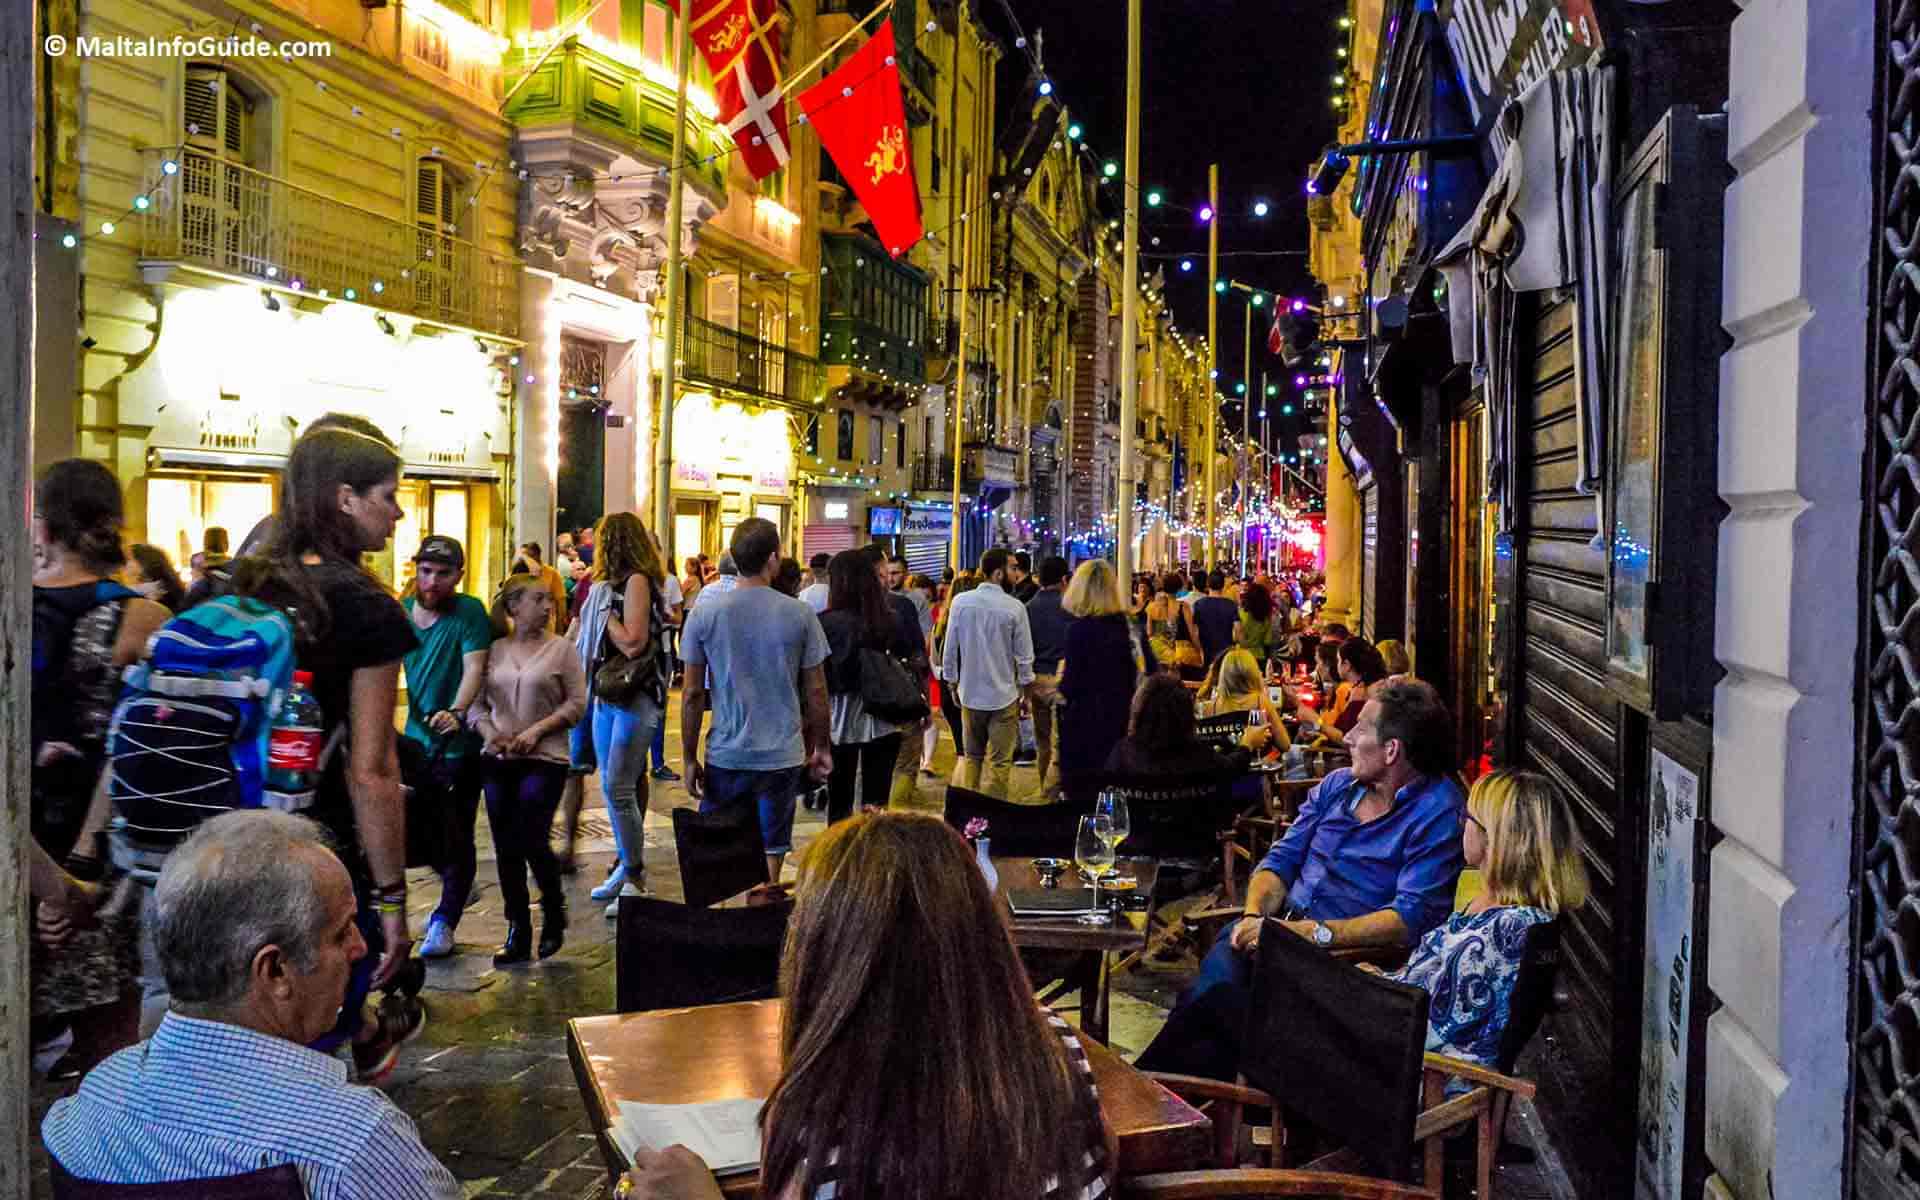 People dining and having a drink at a bar in Valletta.